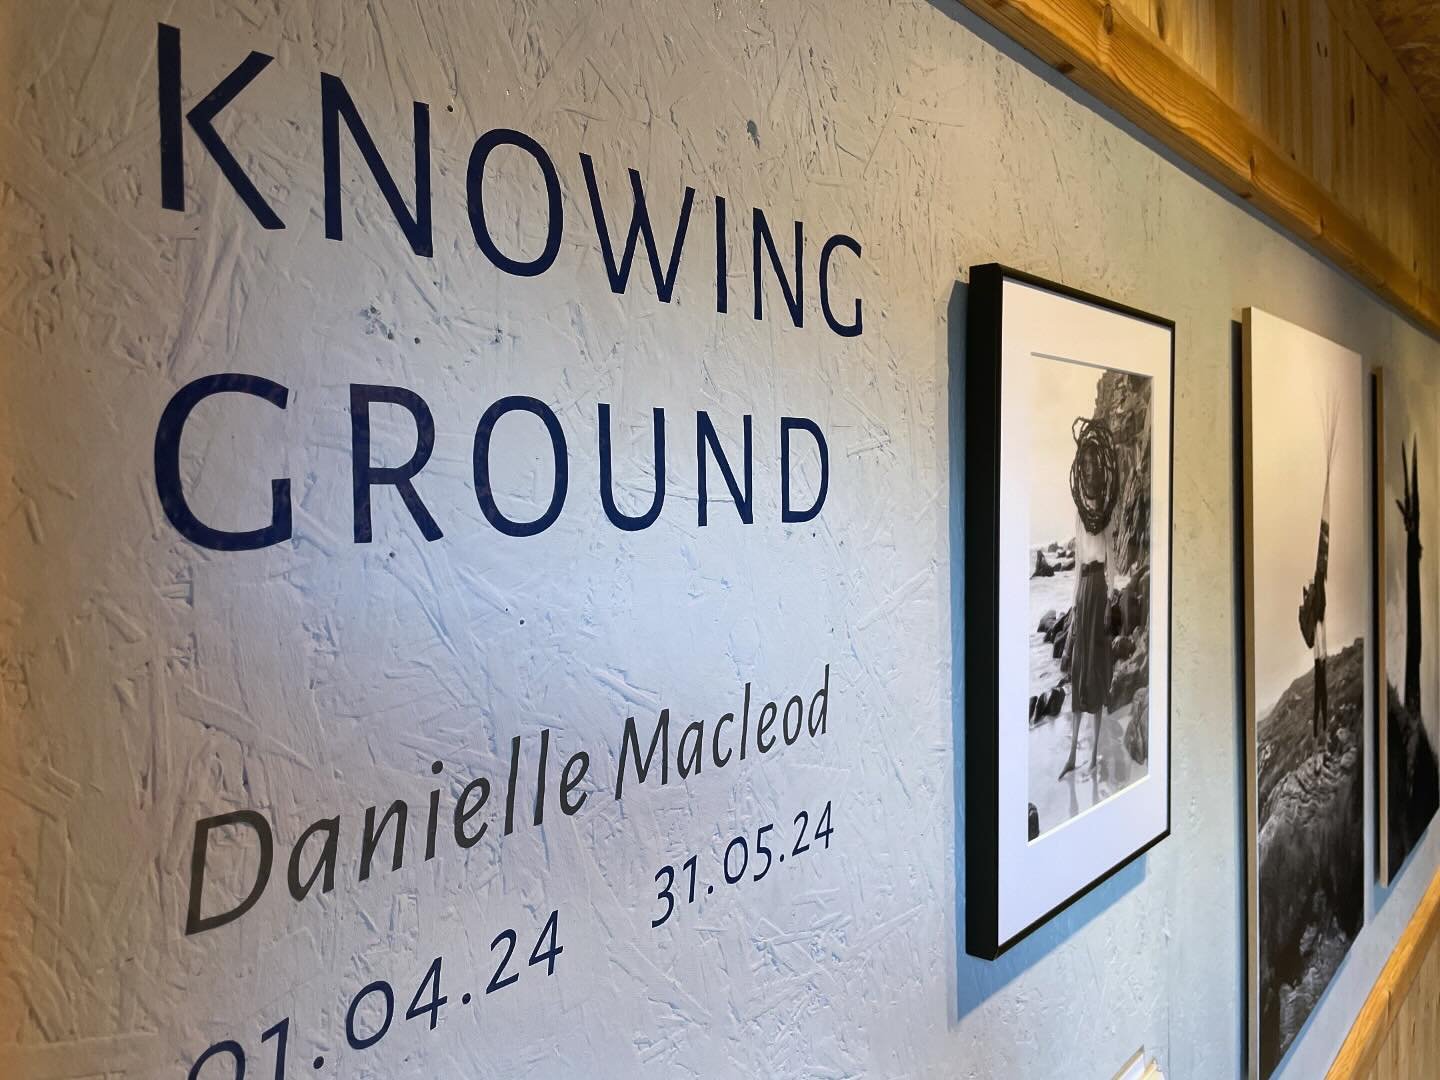 Current exhibition: Knowing Ground by local artist Danielle Macleod. 
Are you on the Isle of Lewis today? If you'd like to catch this fab series, Island Darkroom is open 9am - 5pm ☀️
&bull;
&bull;
#PhotographyExhibition #IslandDarkroom @visitouterheb